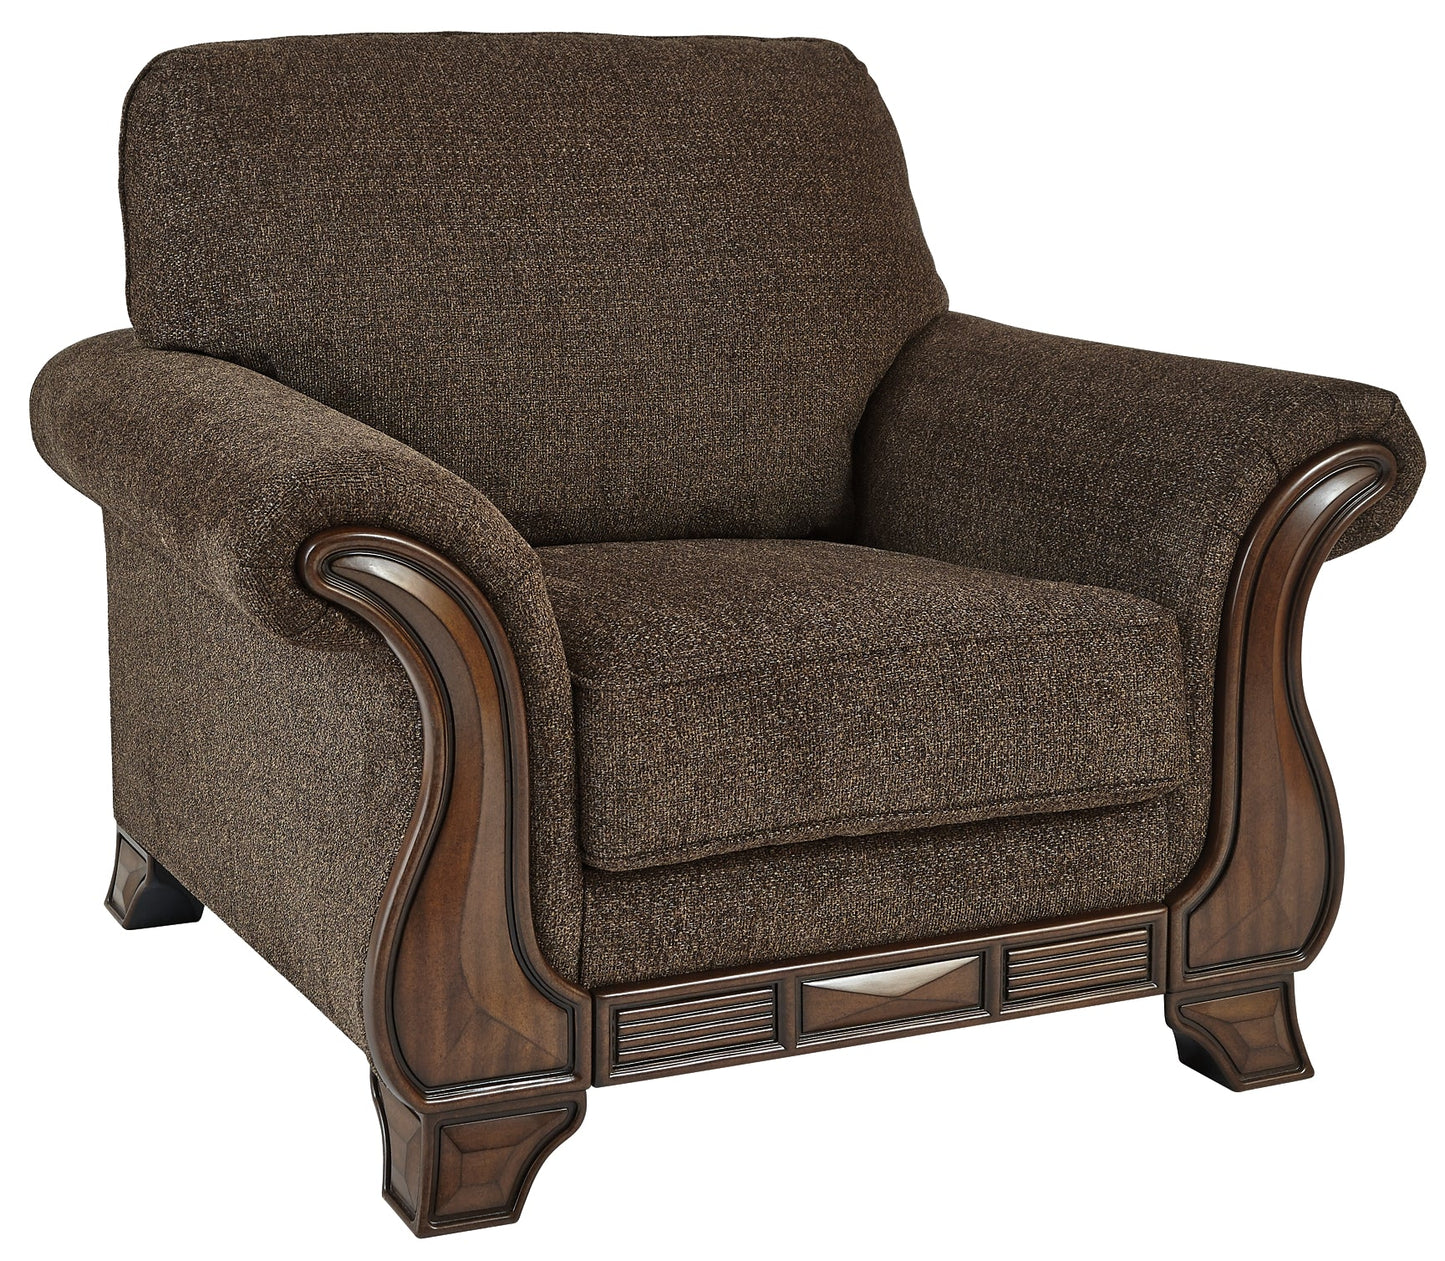 Miltonwood Chair and Ottoman at Walker Mattress and Furniture Locations in Cedar Park and Belton TX.